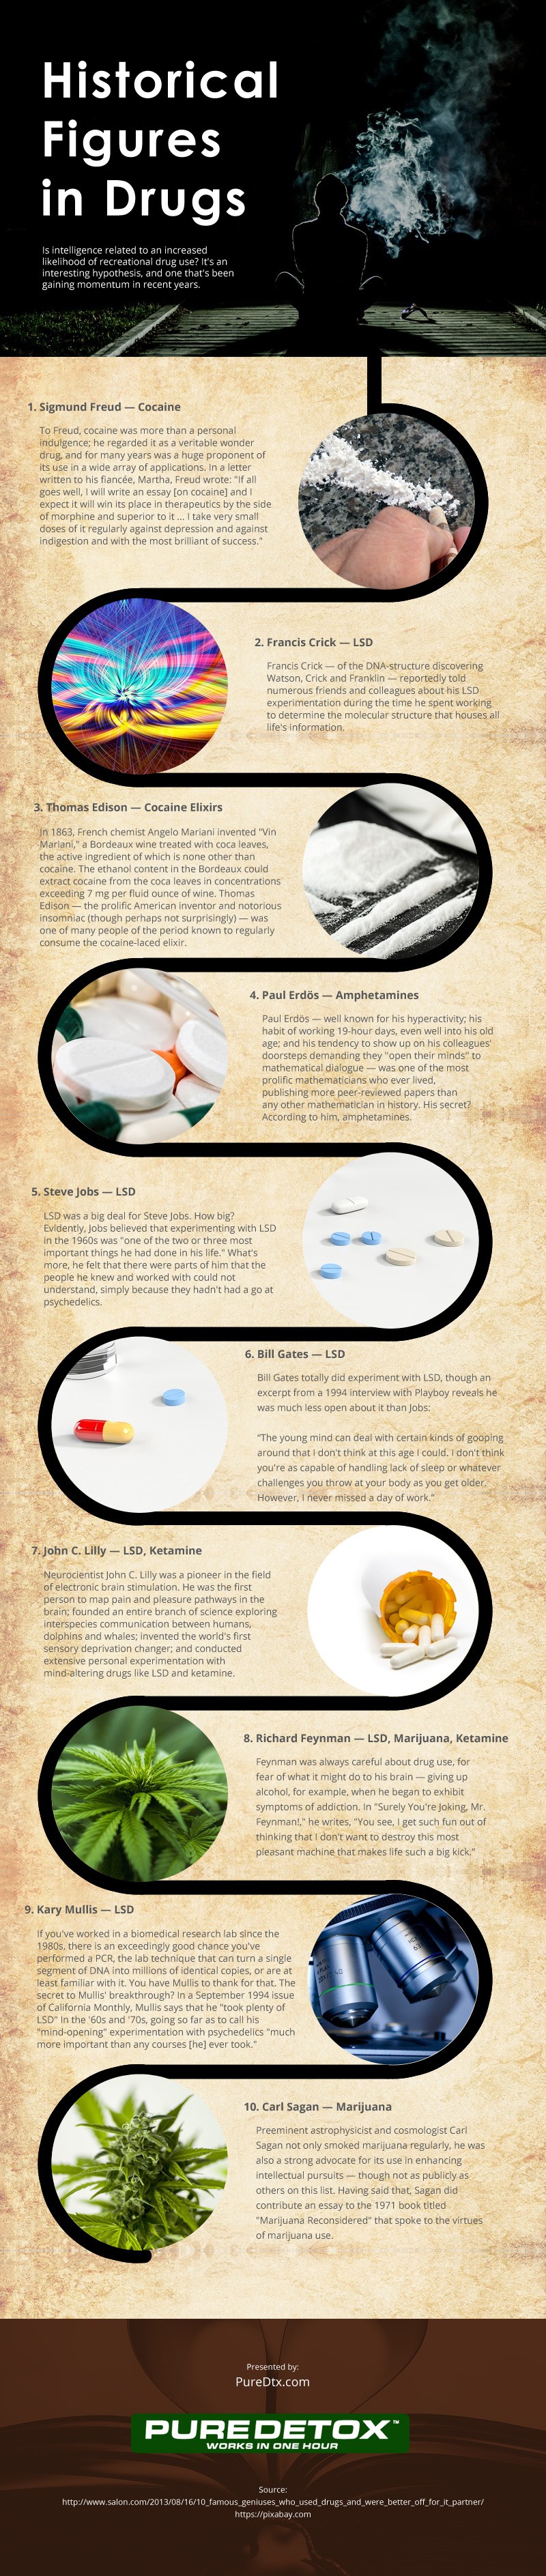 Historical Figures in Drugs [infographic]